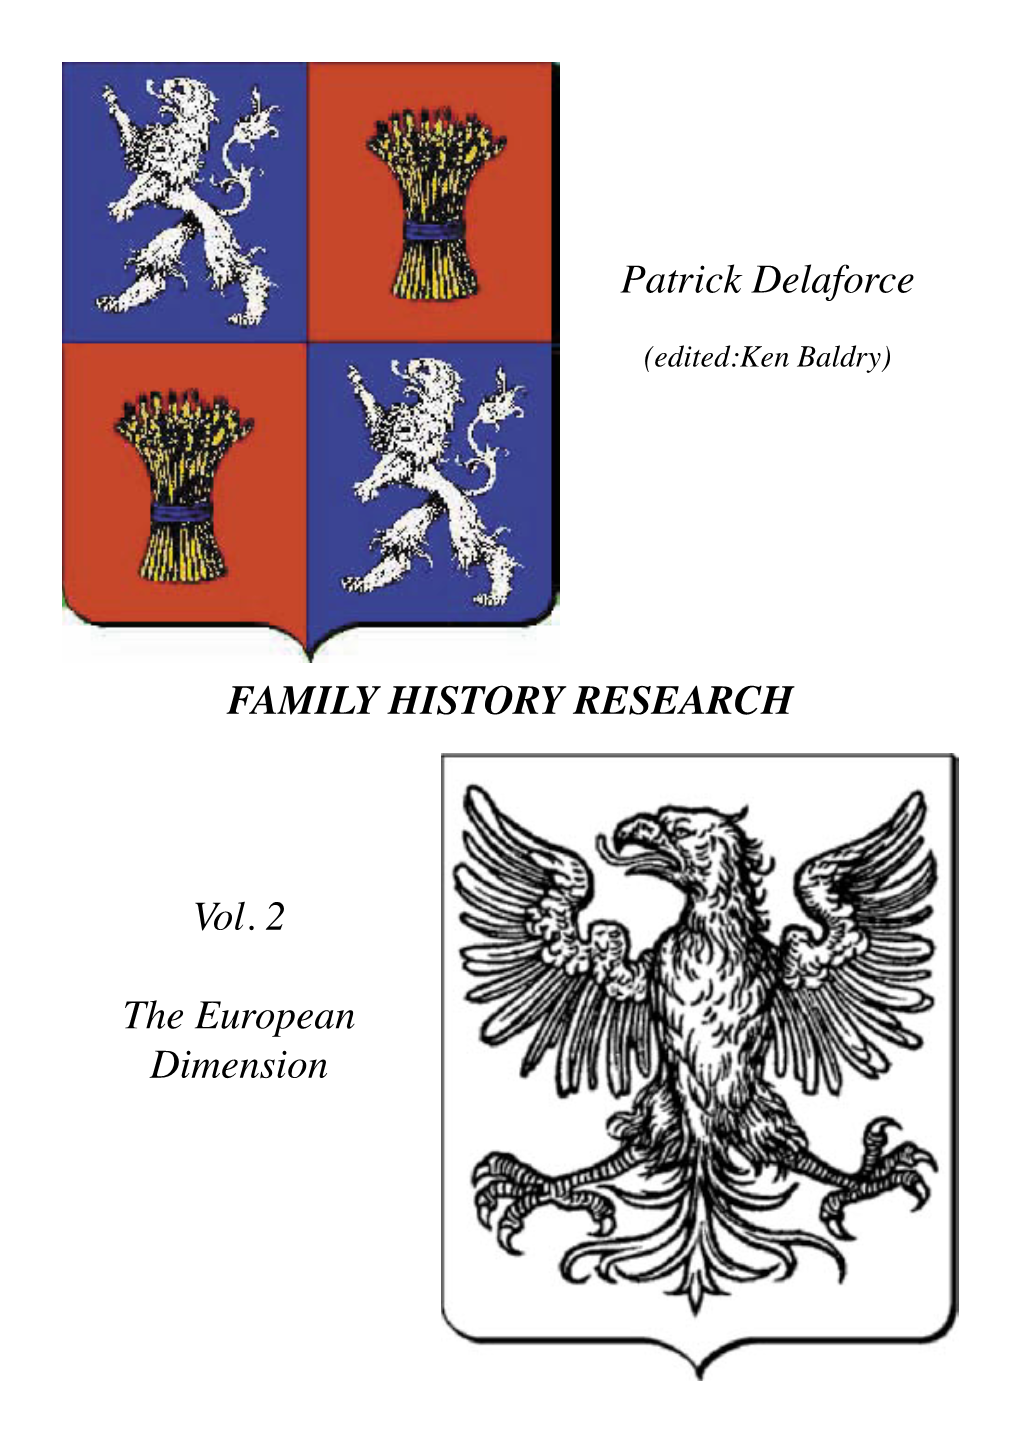 FAMILY HISTORY RESEARCH Patrick Delaforce